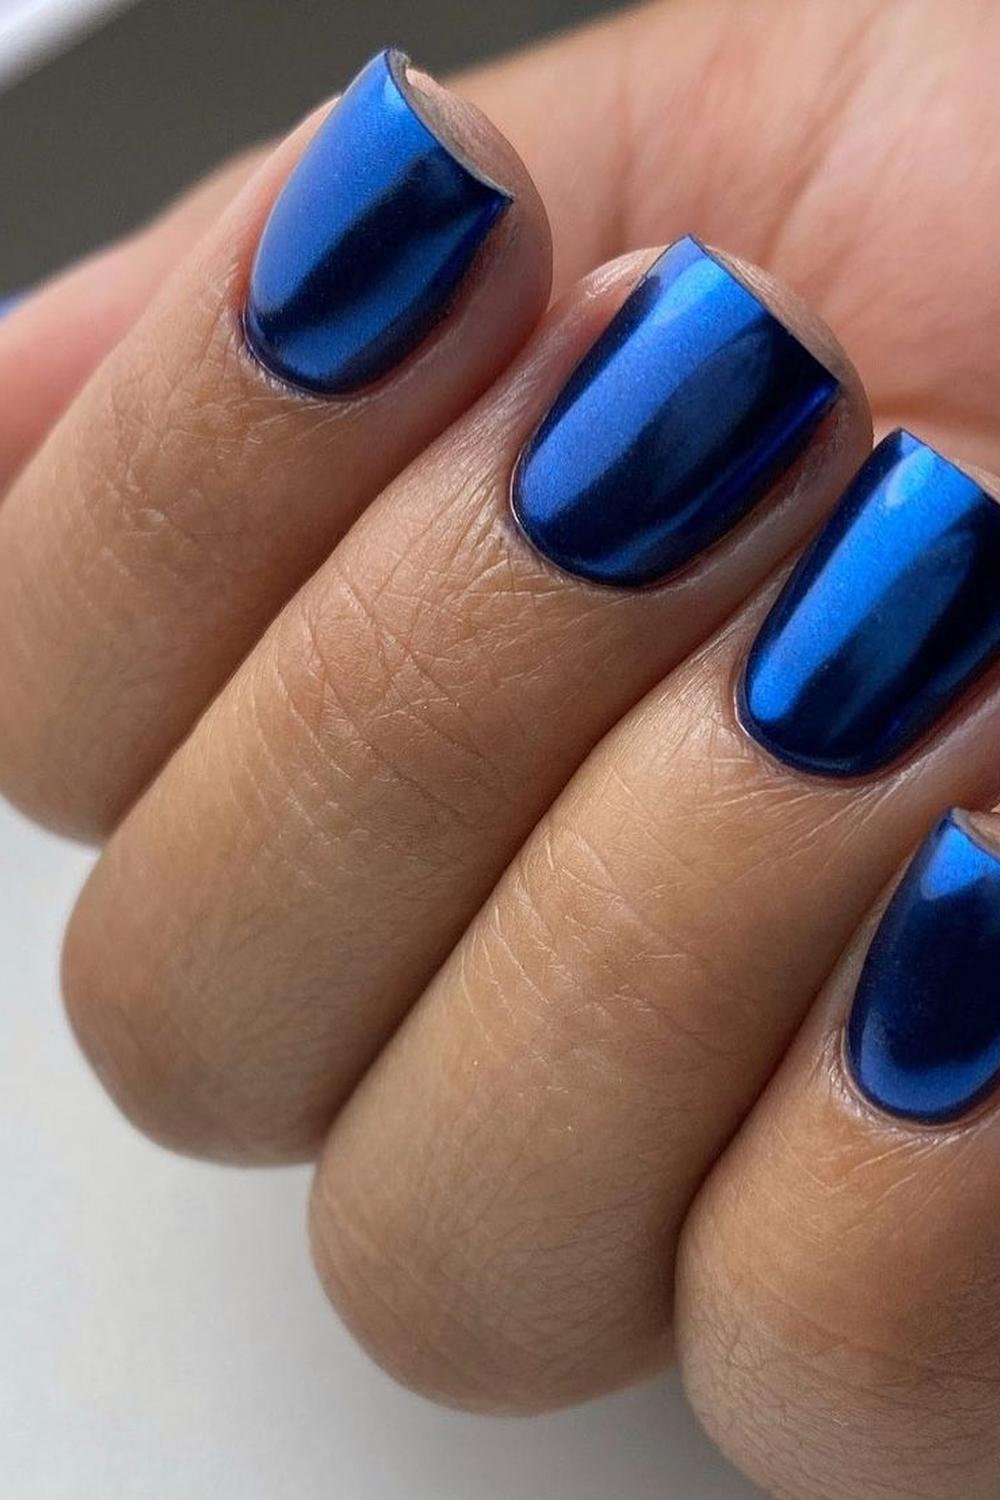 19 - Picture of Blue Chrome Nails